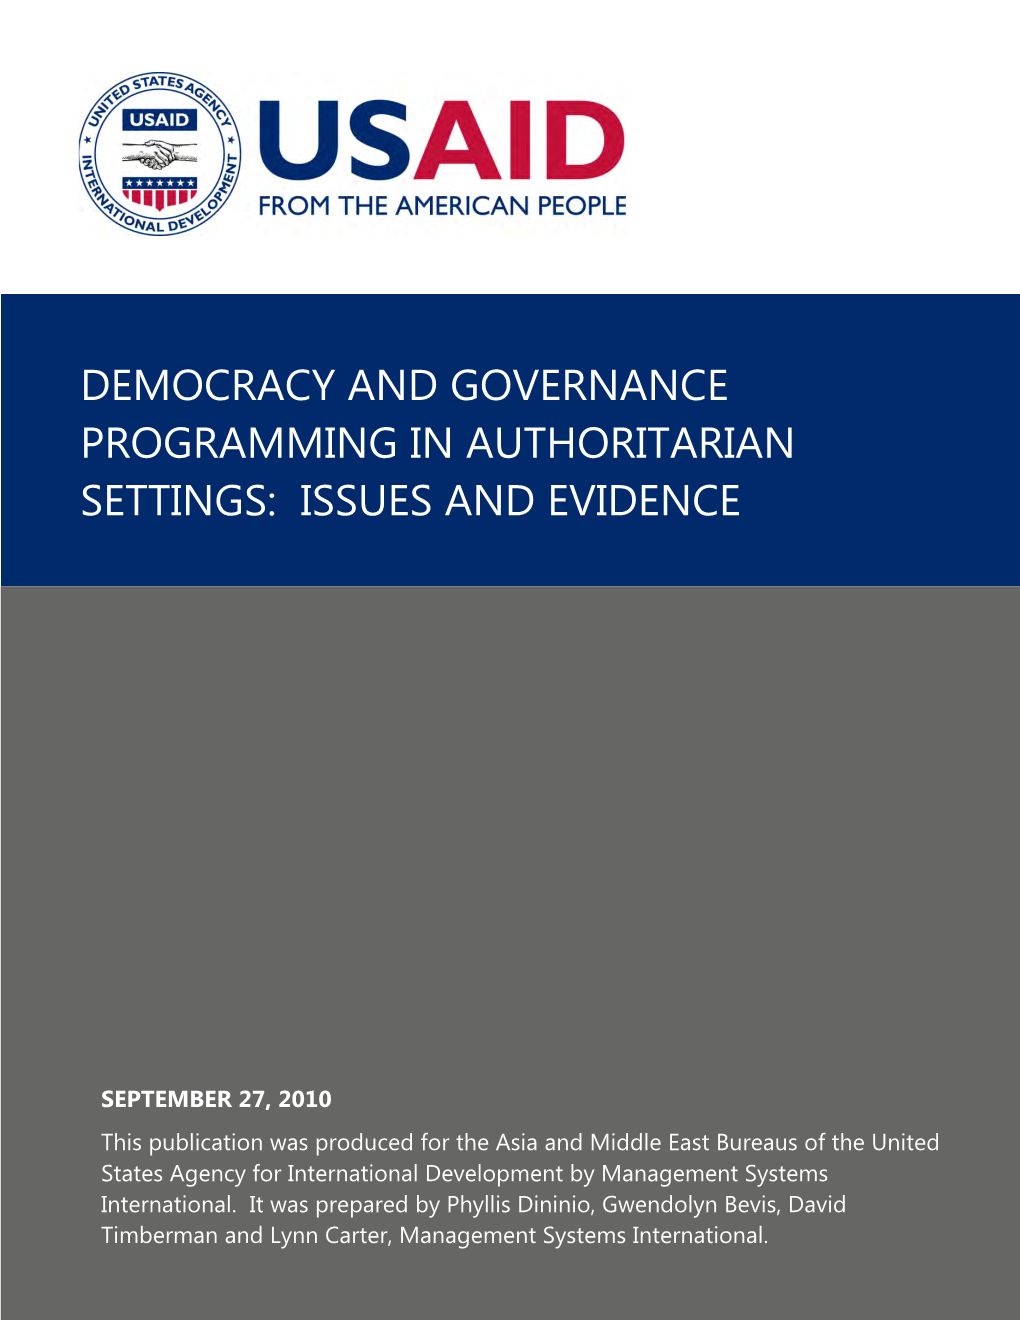 Democracy and Governance Programming in Authoritarian Settings: Issues and Evidence